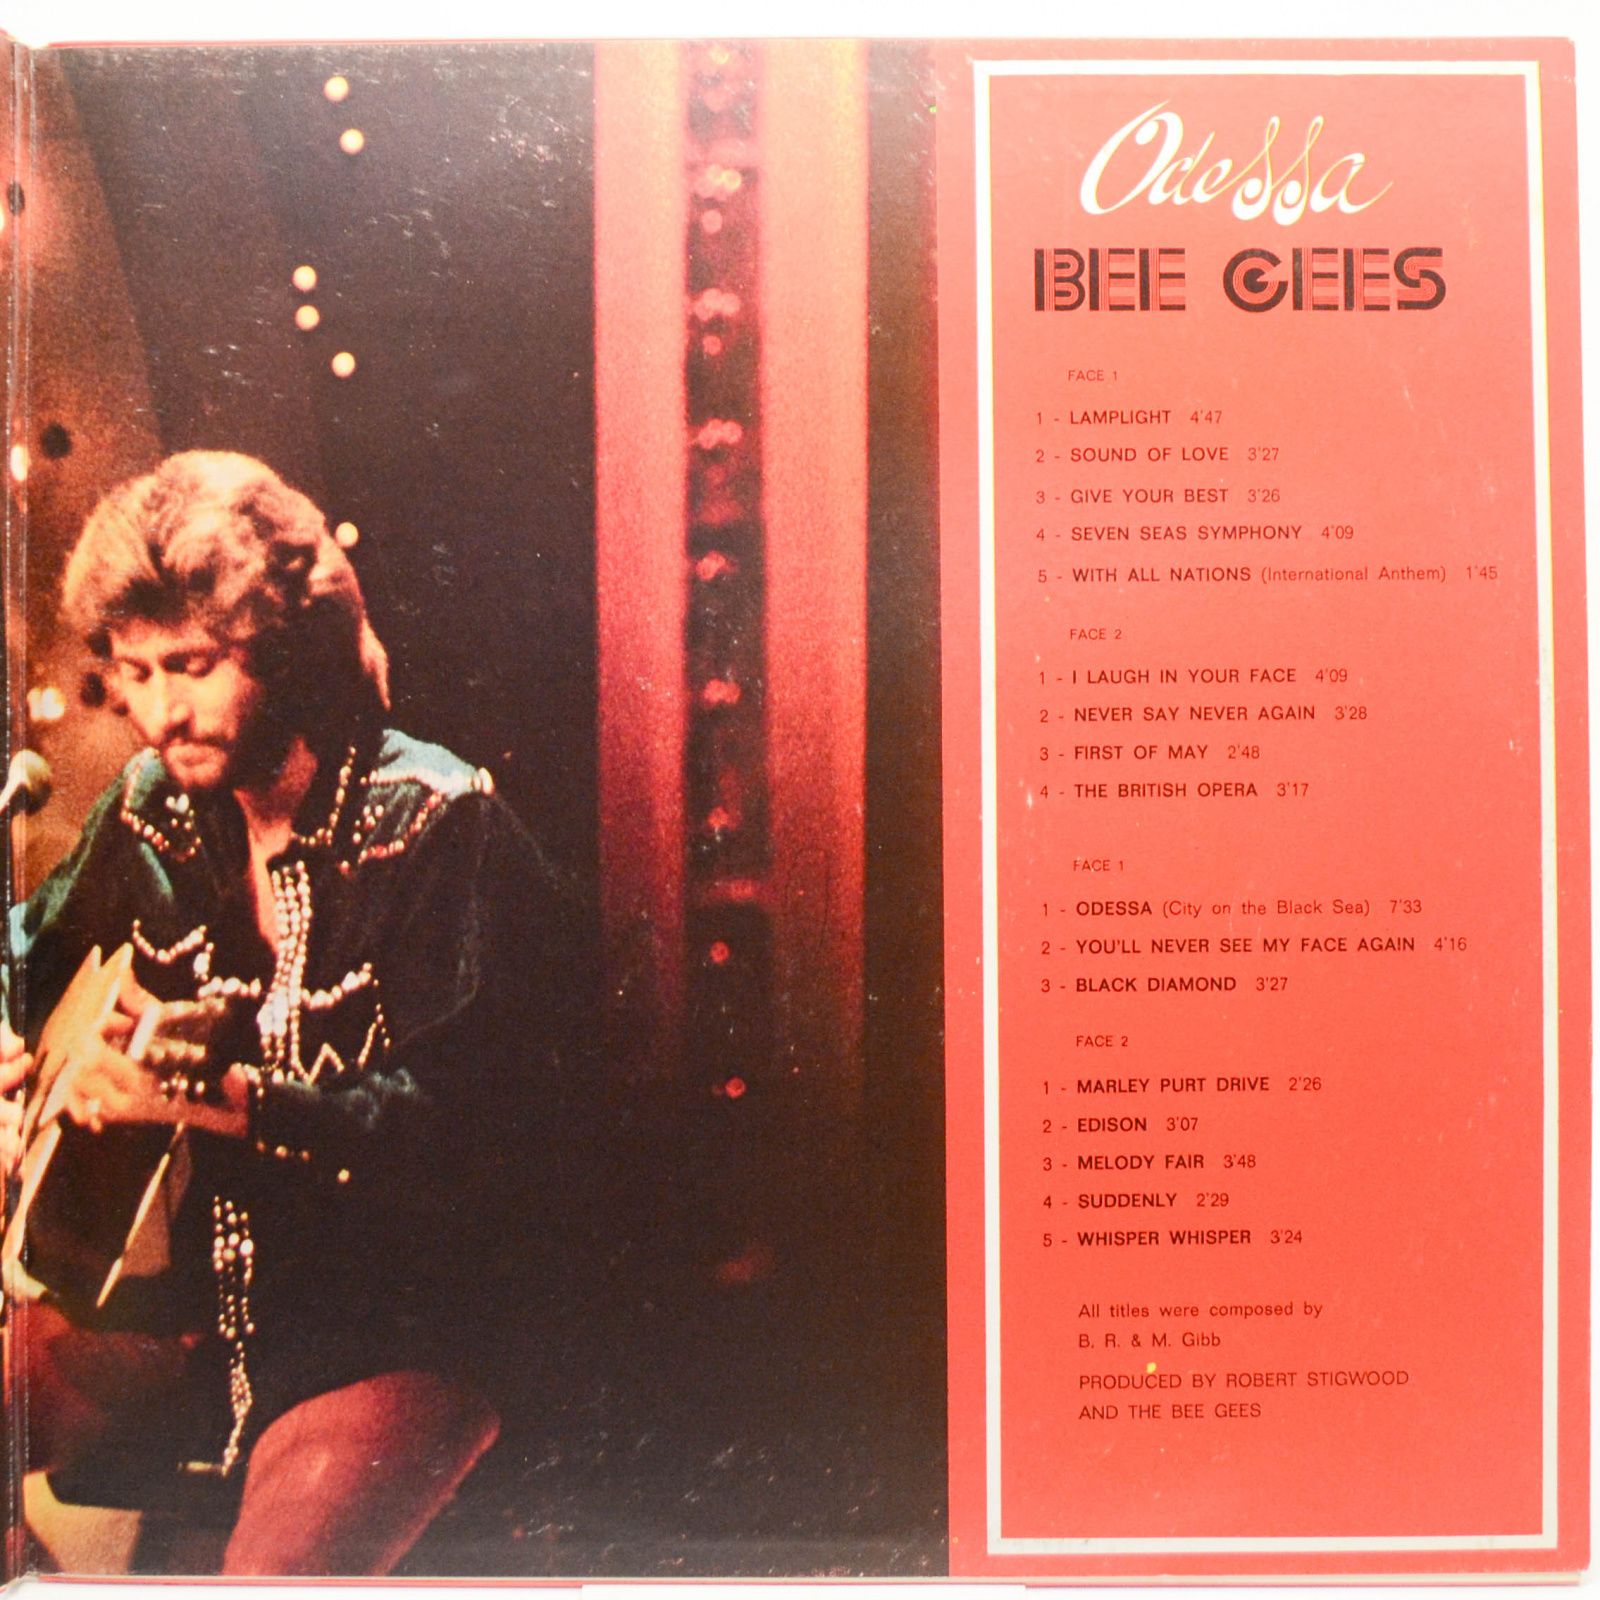 Bee Gees — Odessa (2LP), 1969